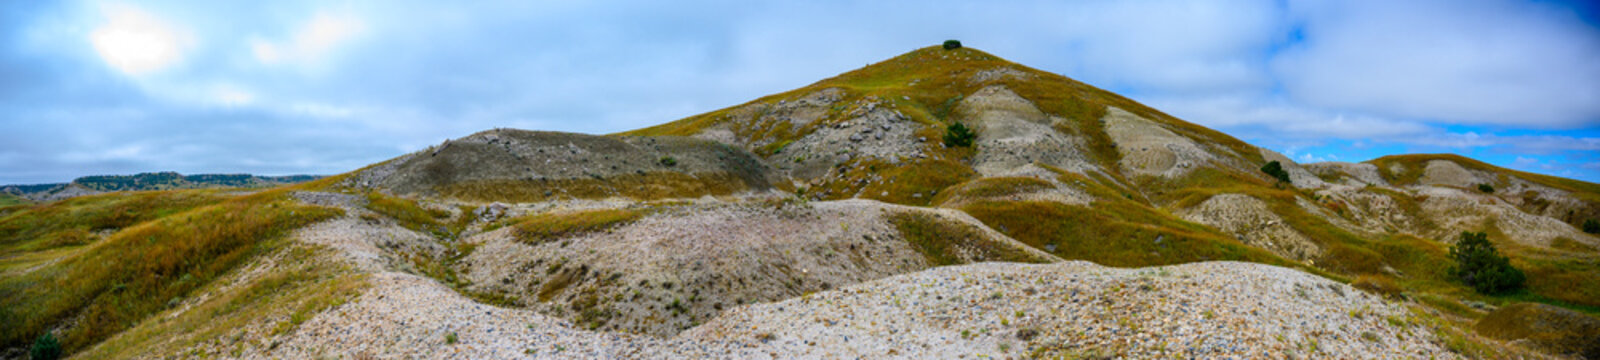 Panoramic picture of the French Creek rock agate beds in Buffalo Gap National Grassland